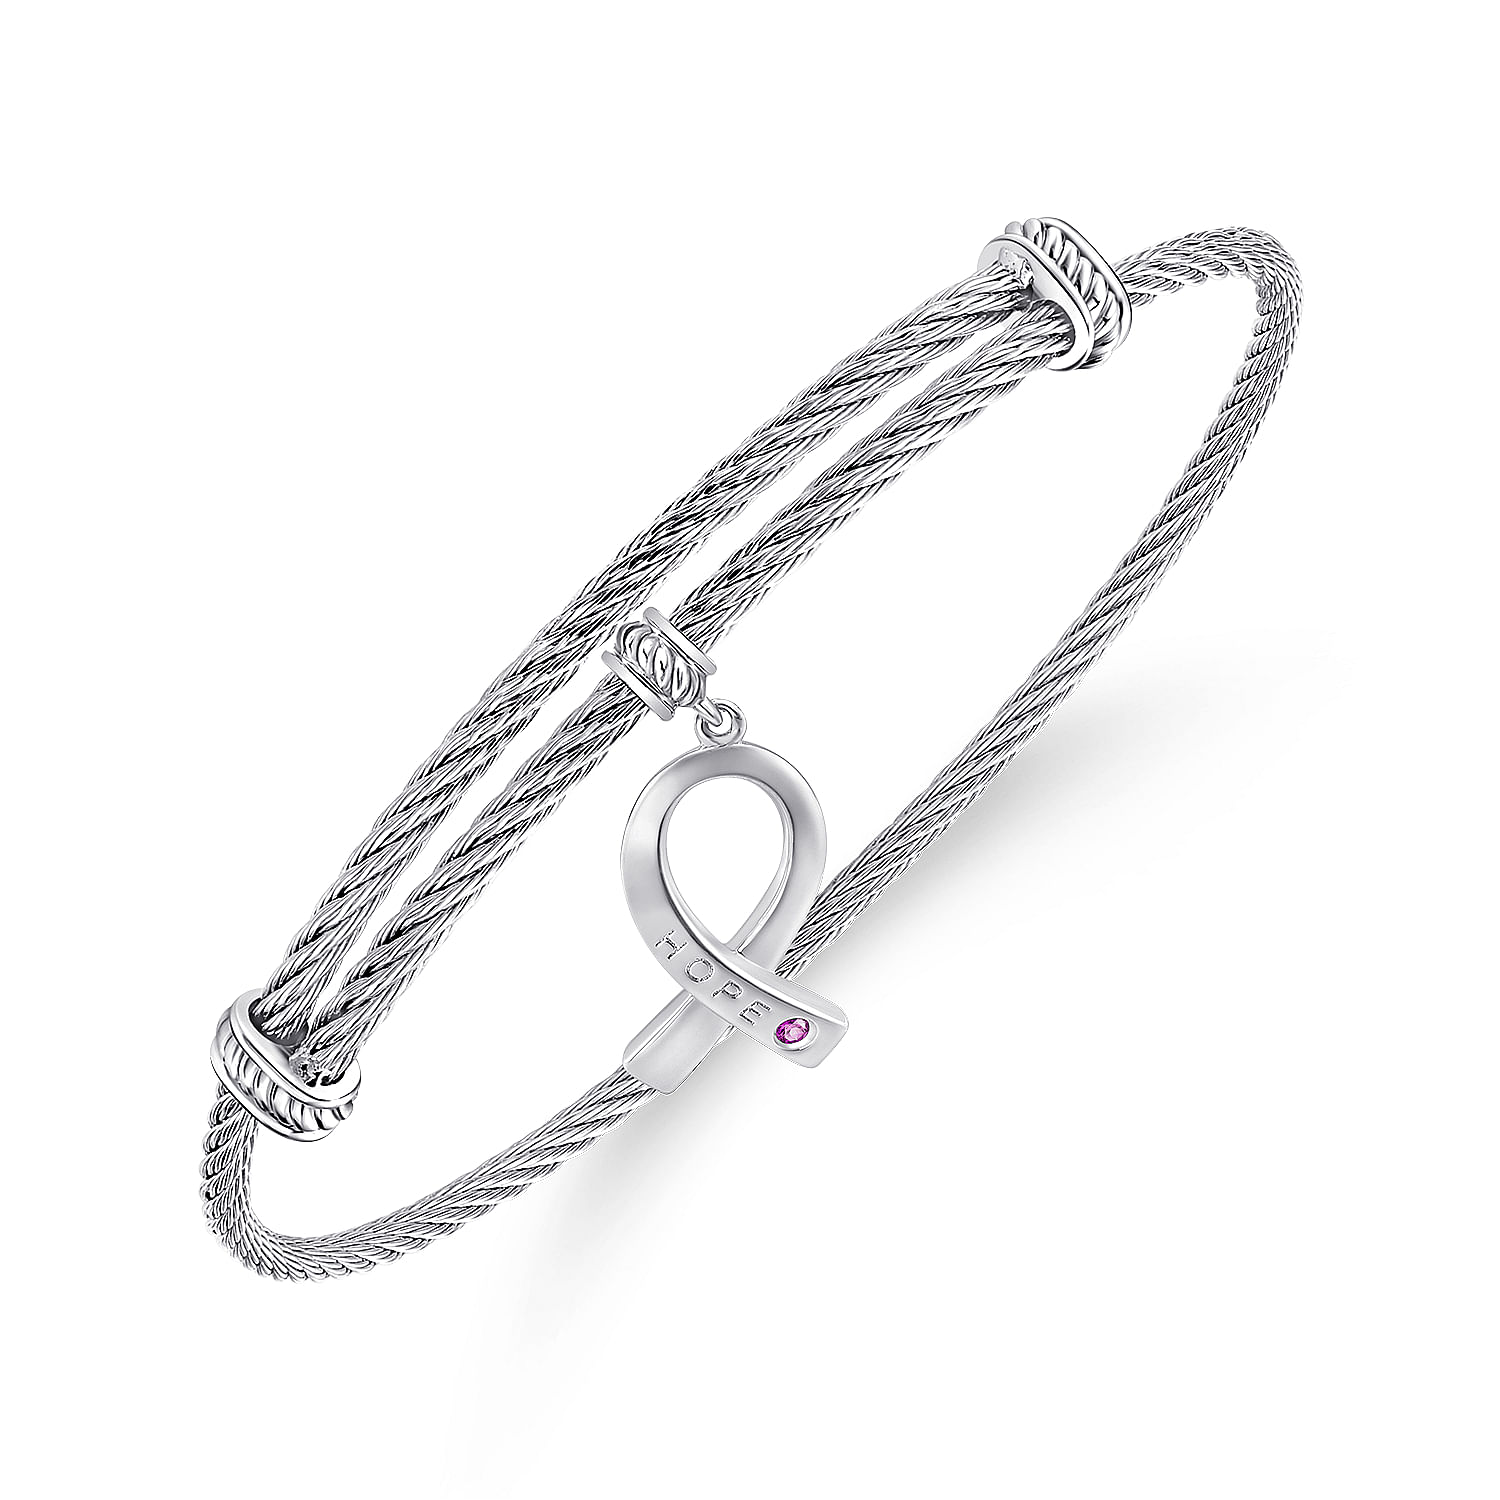 Adjustable Twisted Cable Stainless Steel Bangle with Sterling Silver Amethyst Breast Cancer Charm